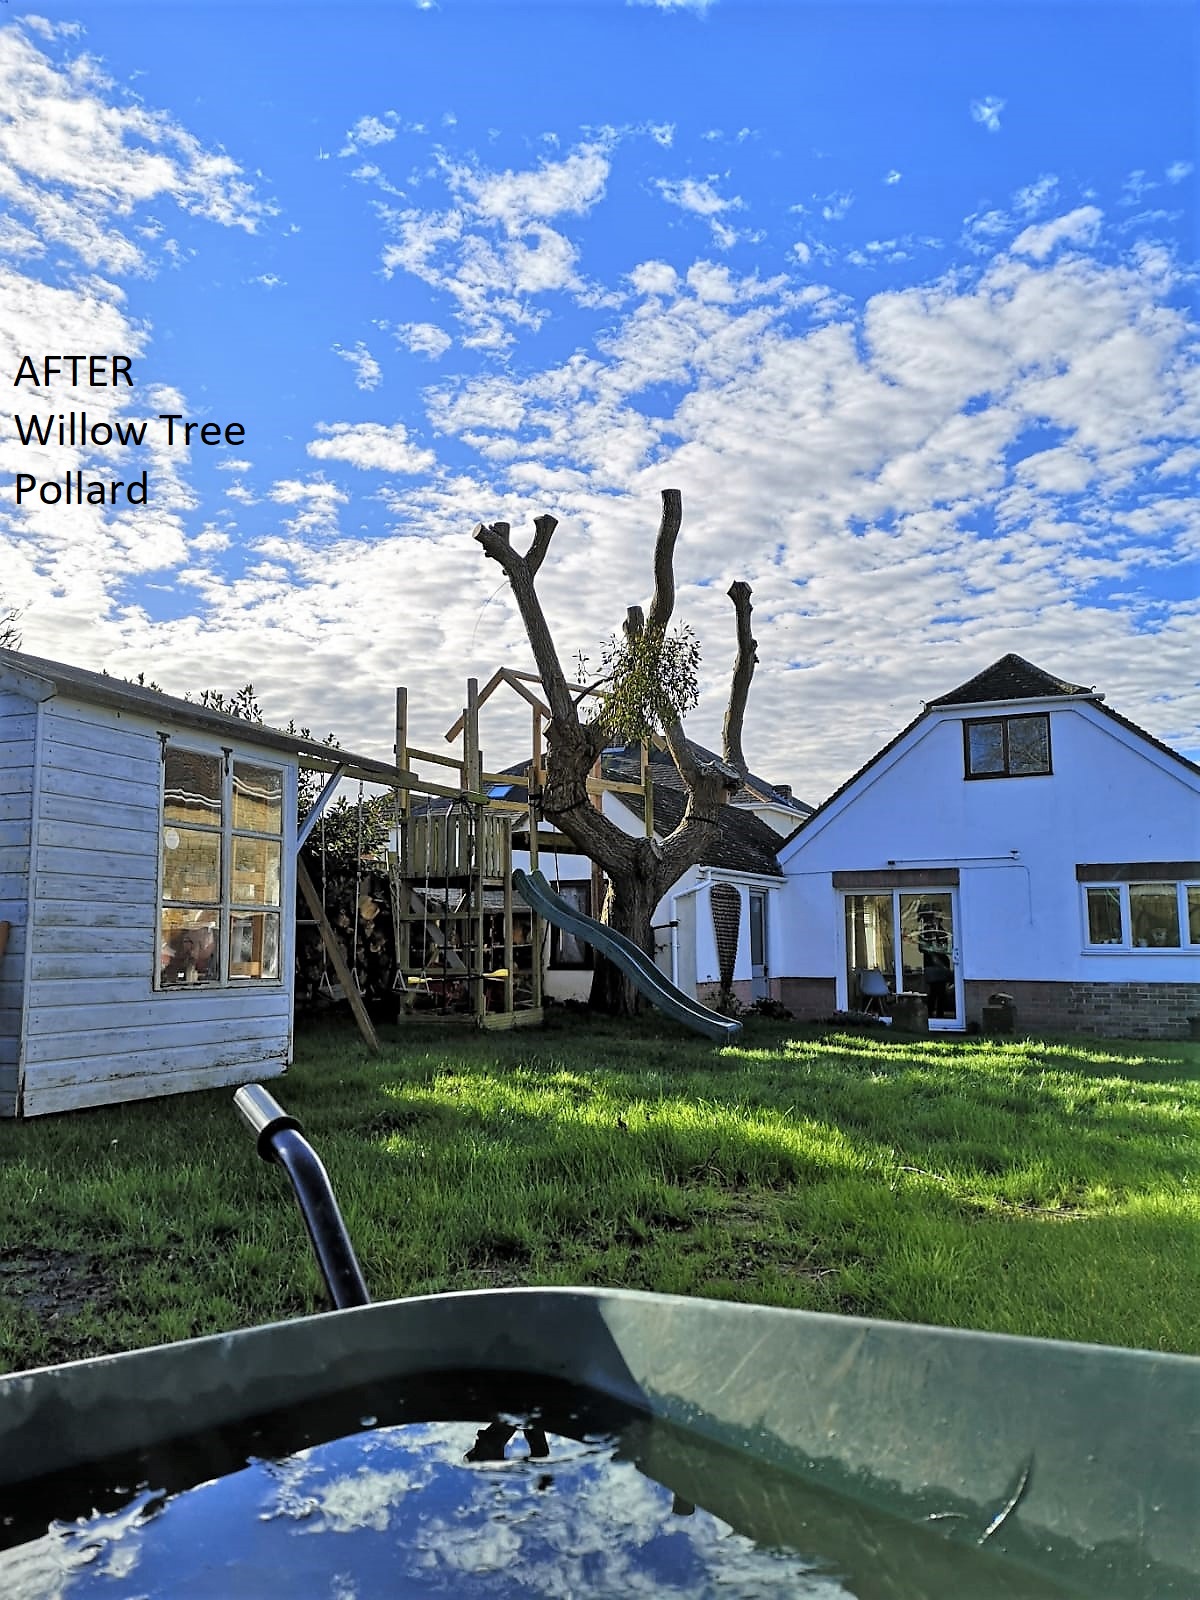 Weymouth tree surgeon. Tree Care - Tree Pruning - Photo: before and after. Weymouth Portland Dorchester.